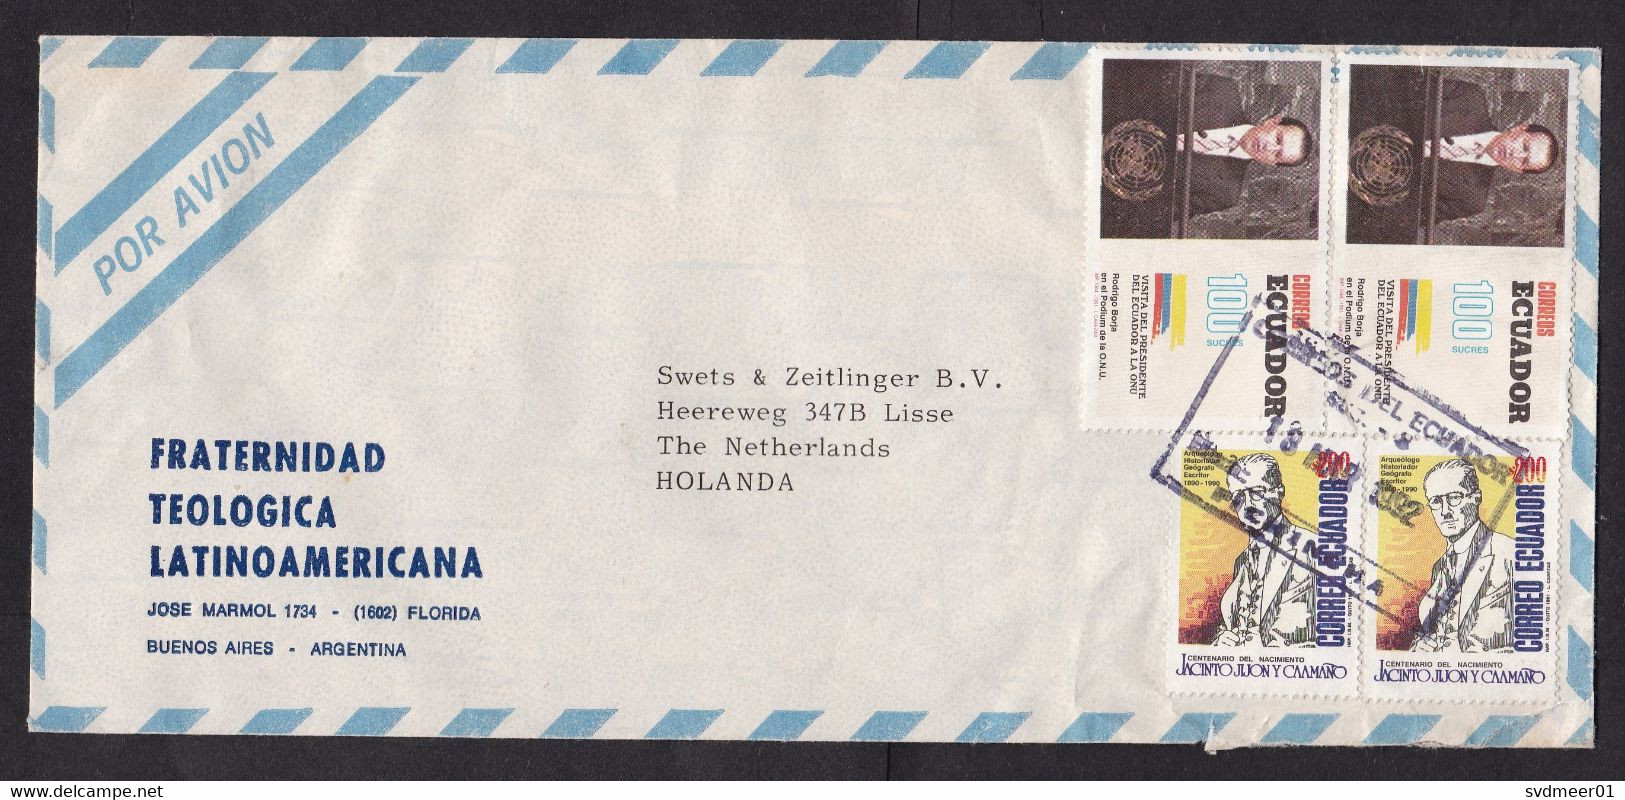 Ecuador: Airmail Cover To Netherlands, 1992, 4 Stamps, President Speech At United Nations, History (minor Creases) - Ecuador